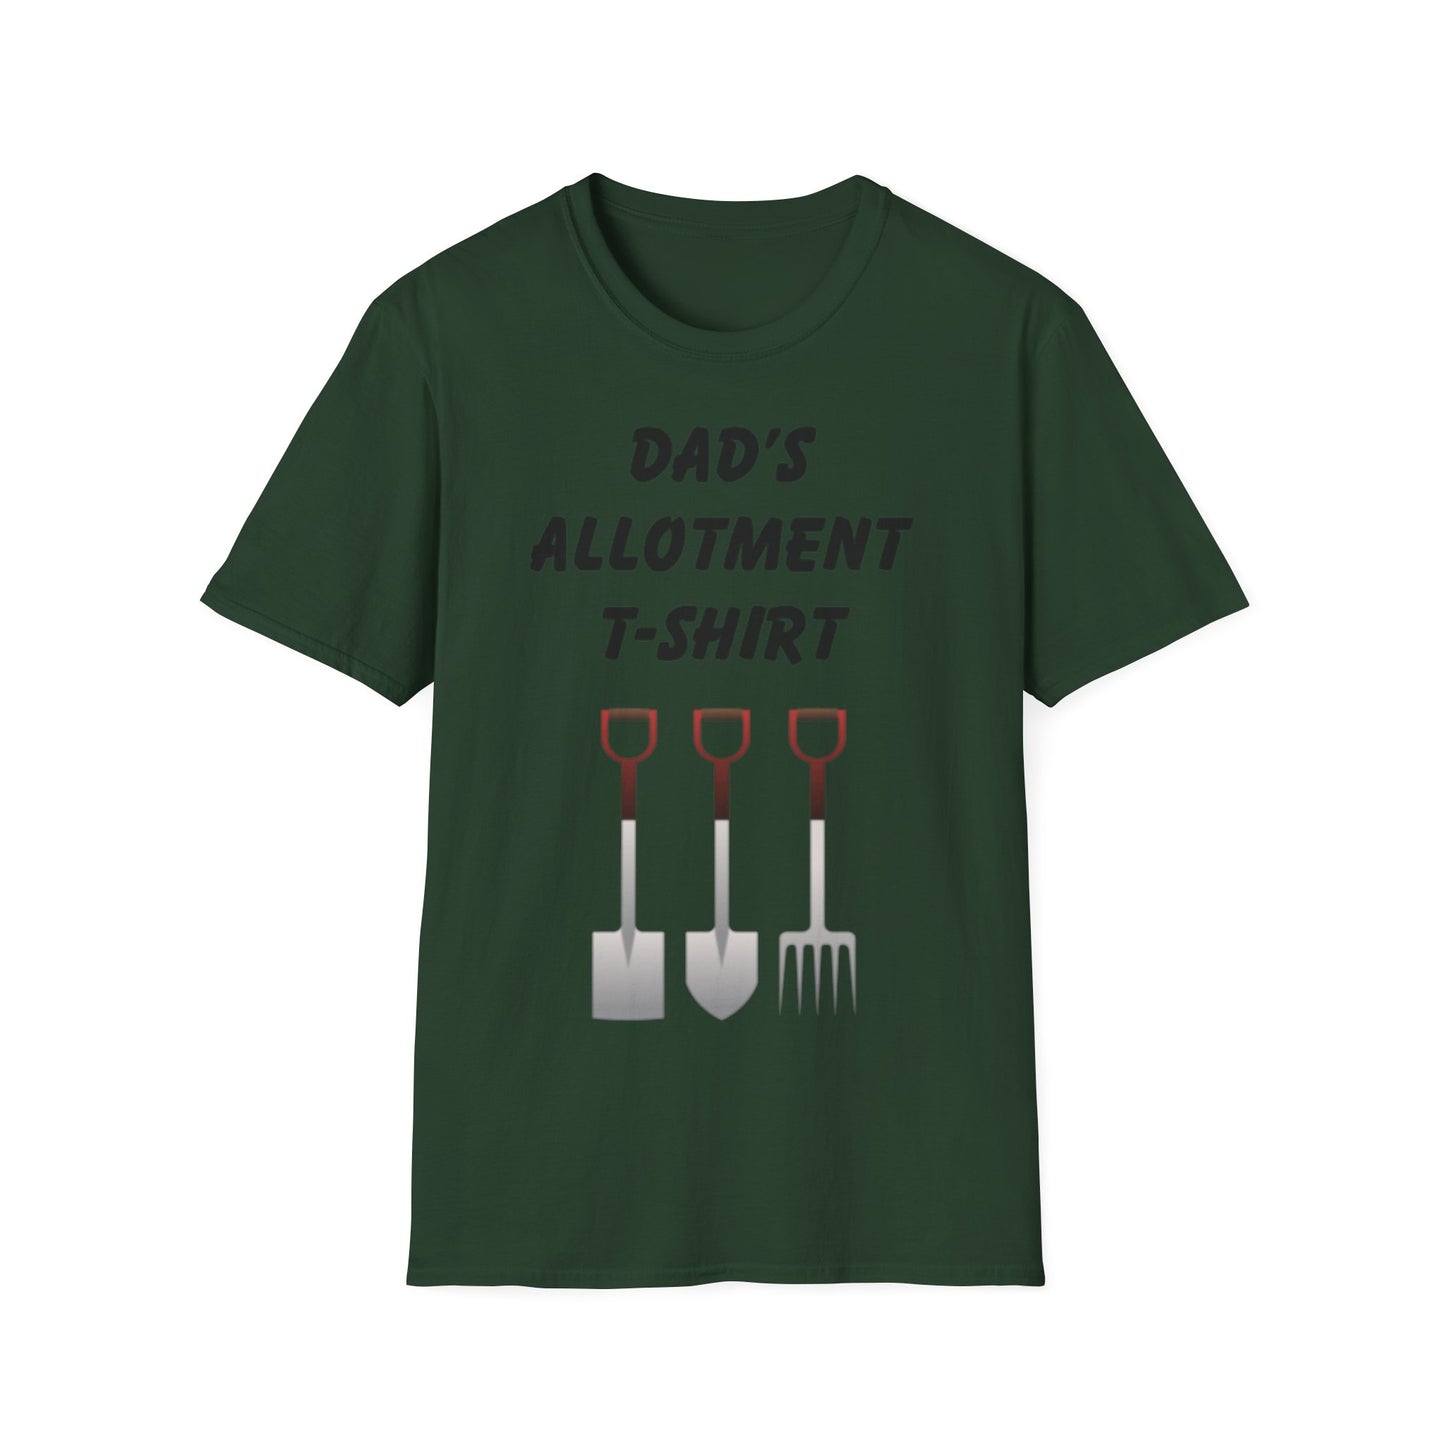 Dad's Allotment T-shirt Father's Day T-Shirt